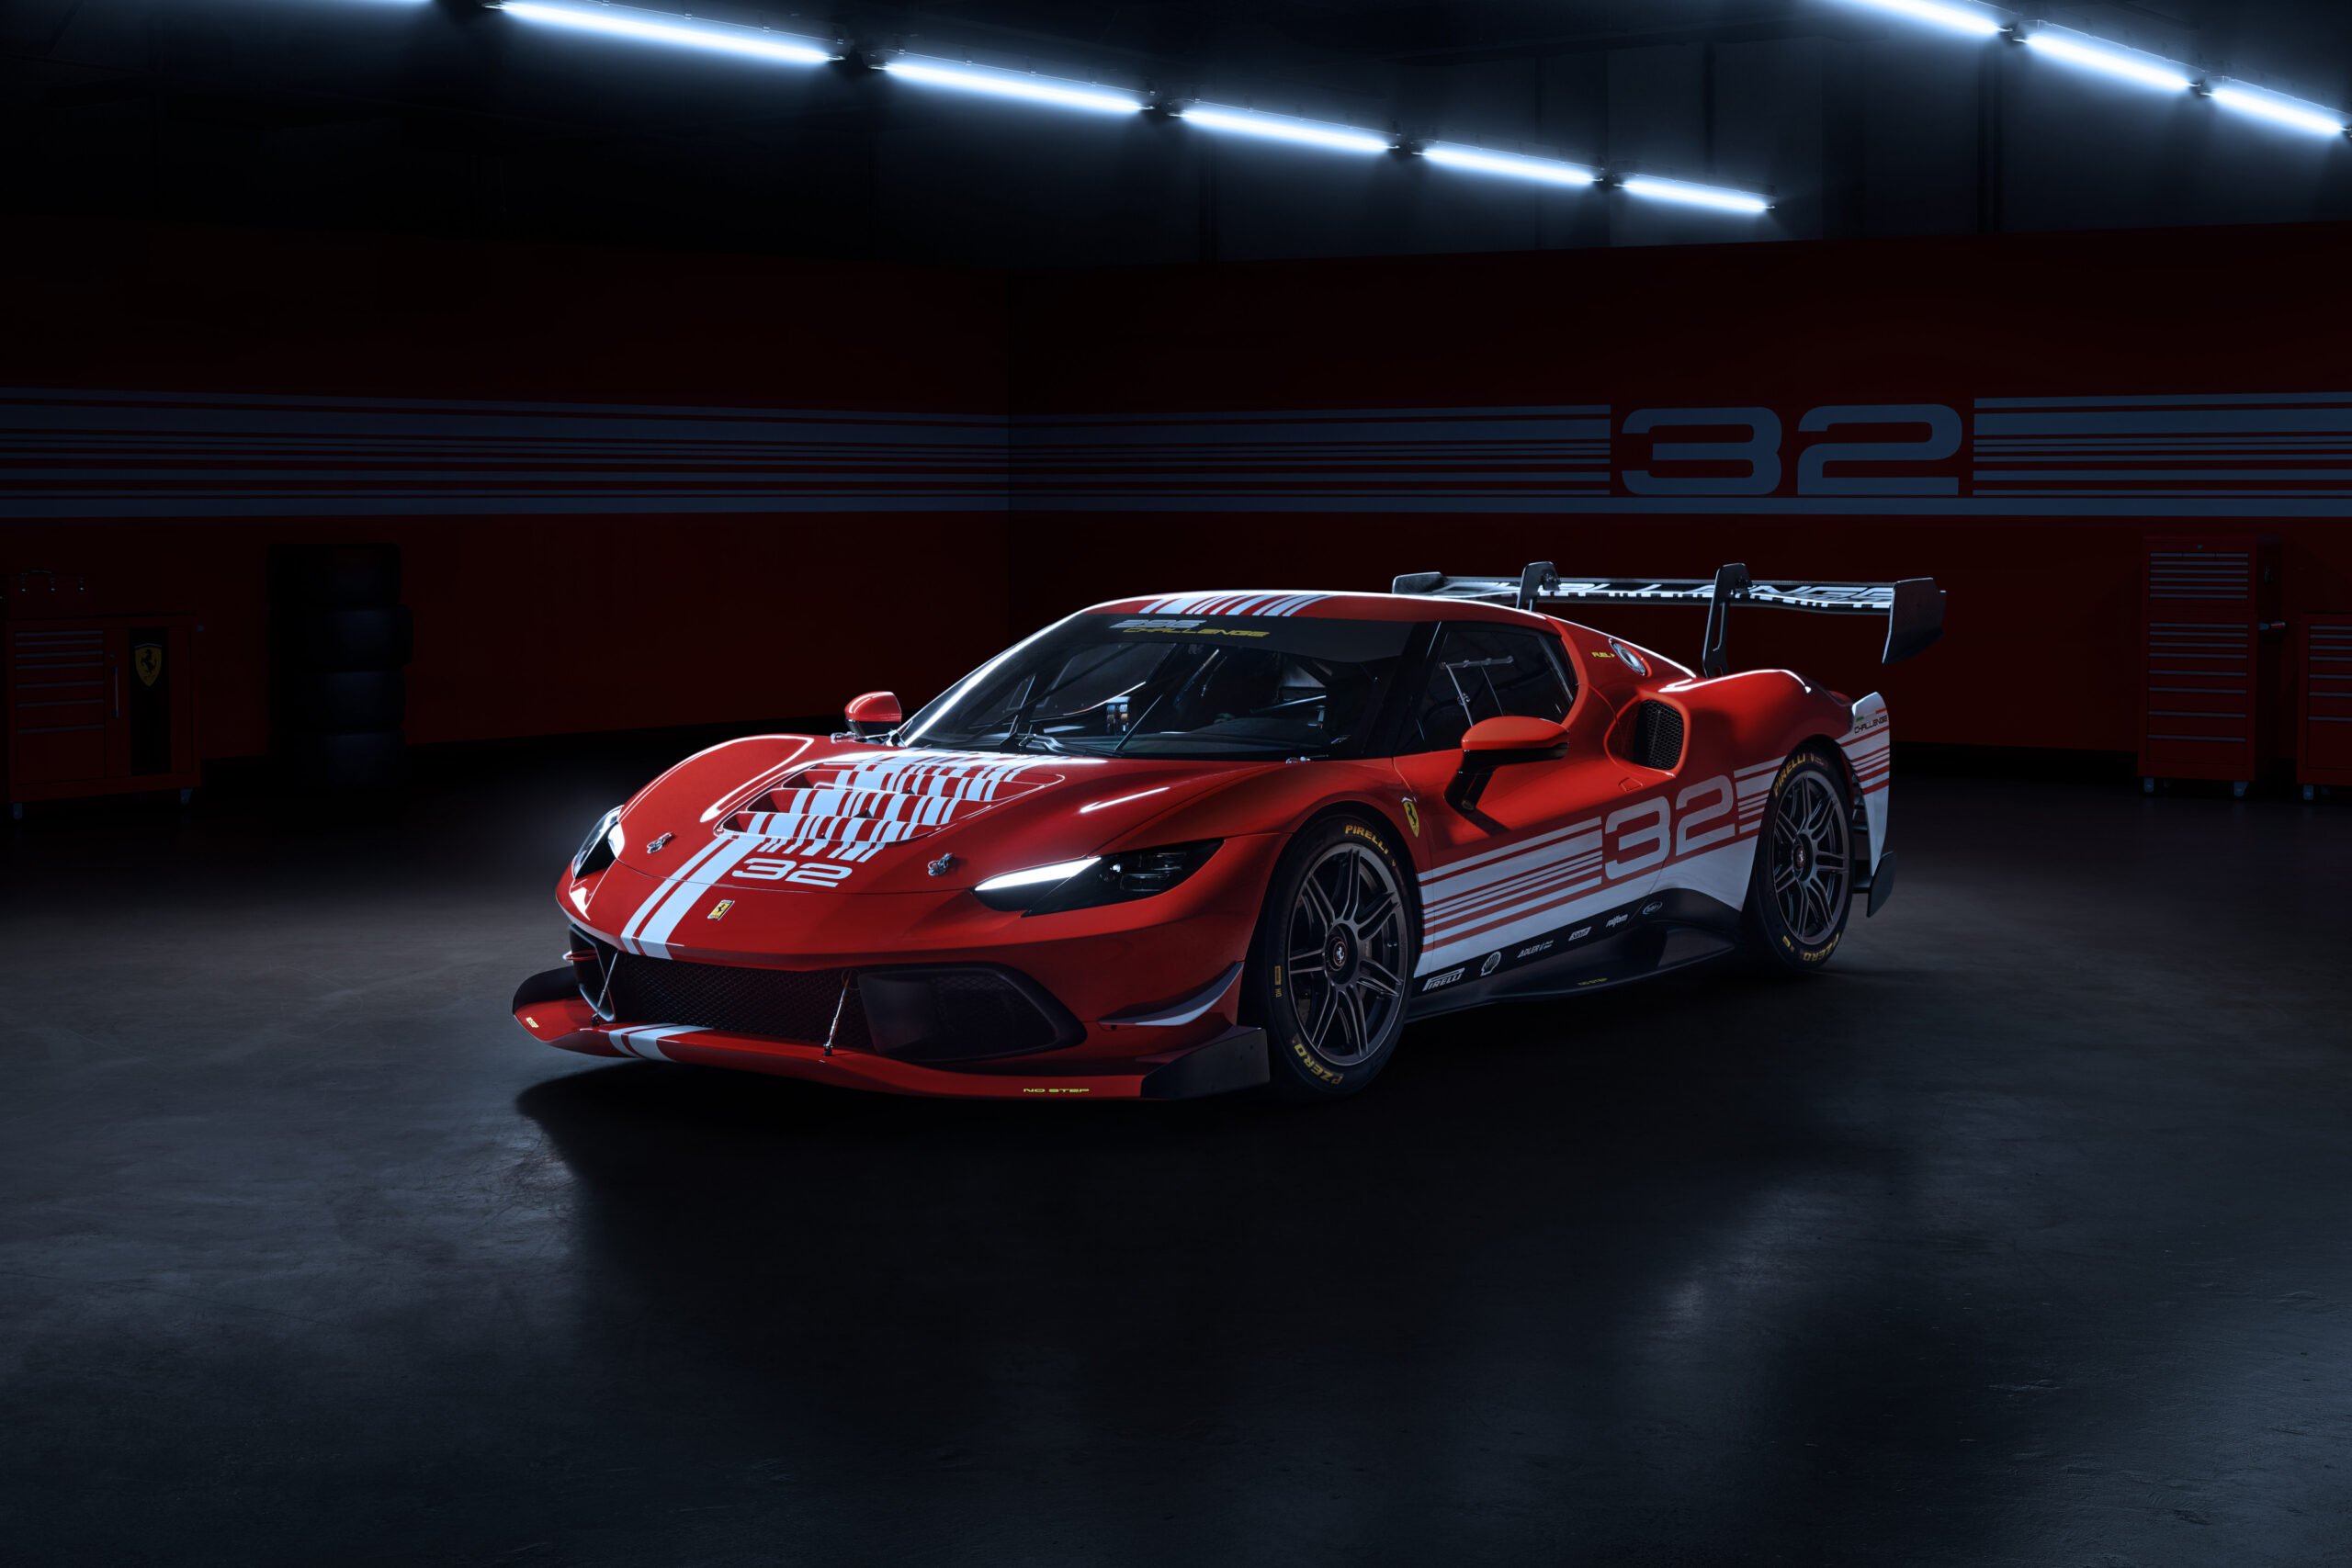 THE 296 CHALLENGE: PREVIEW OF THE NEW FERRARI CHALLENGE CONTENDER